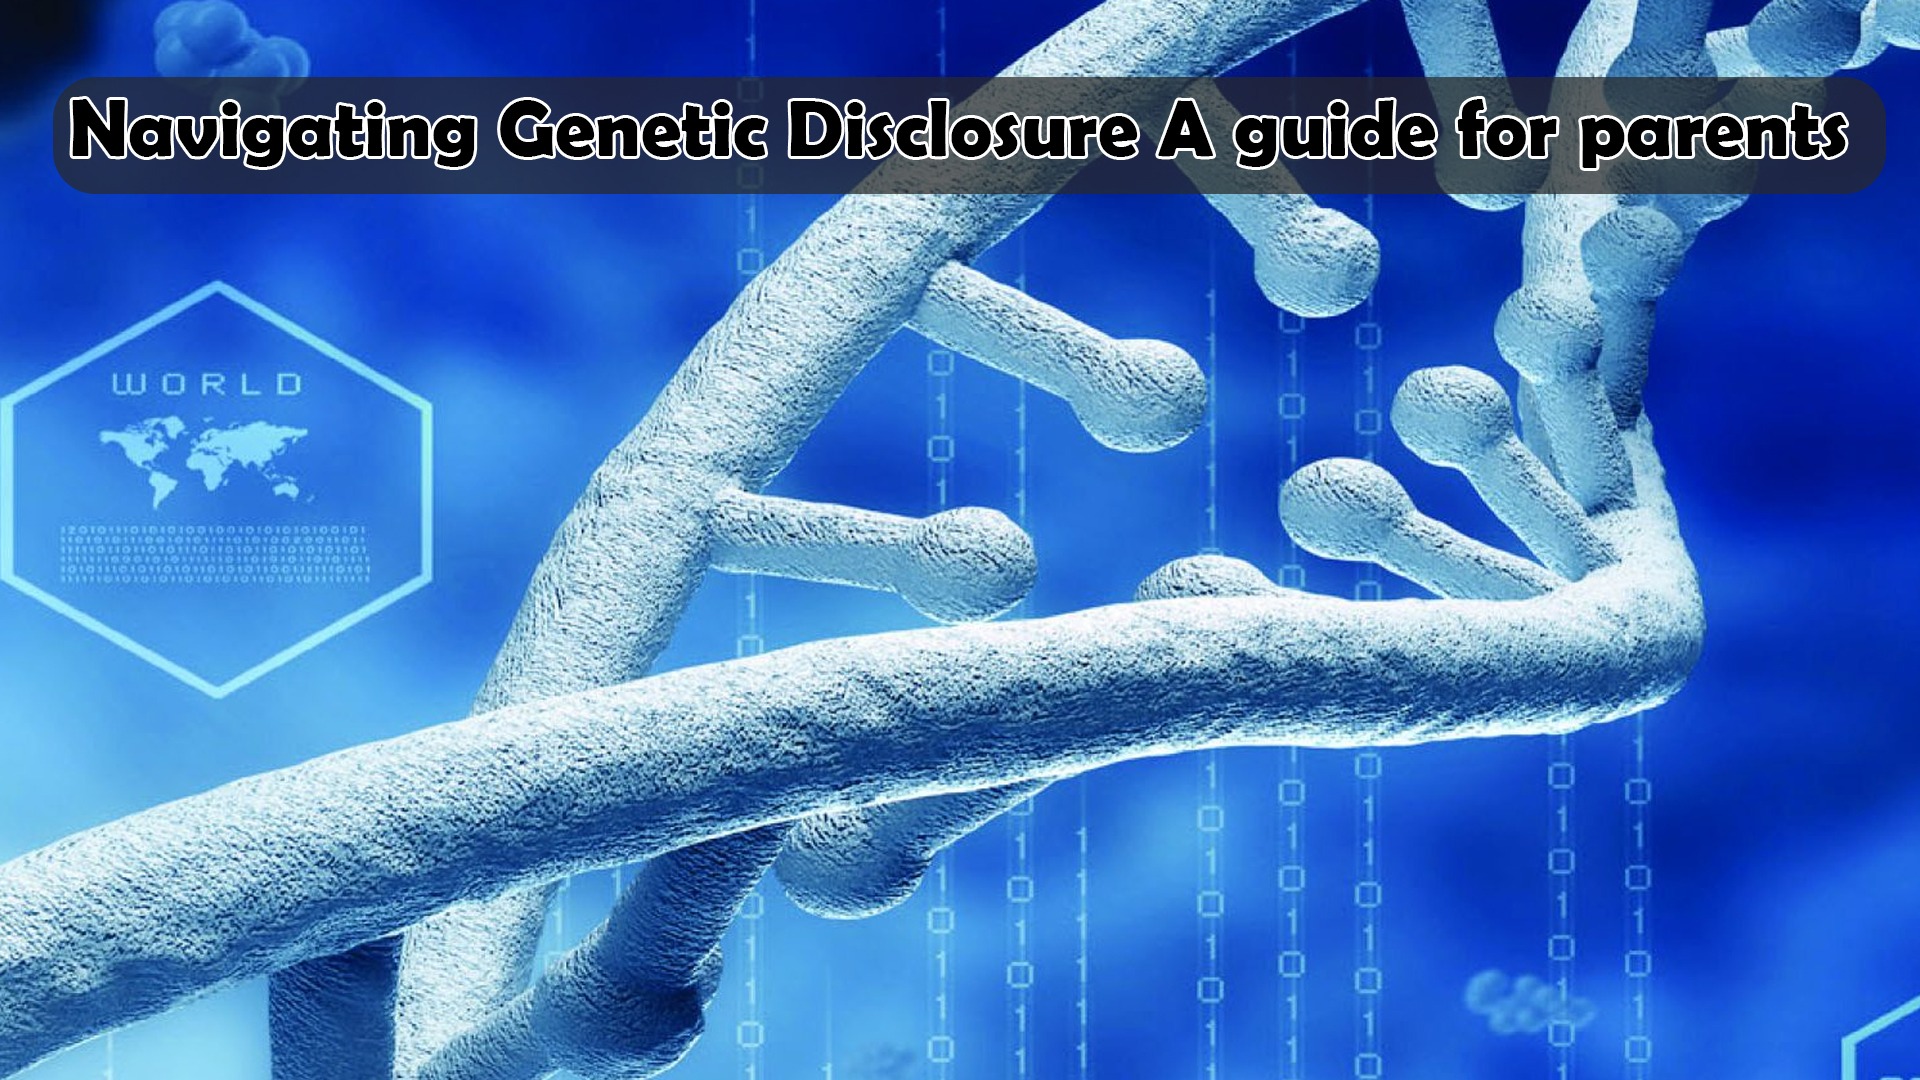 Navigating Genetic Disclosure: A Guide for Parents